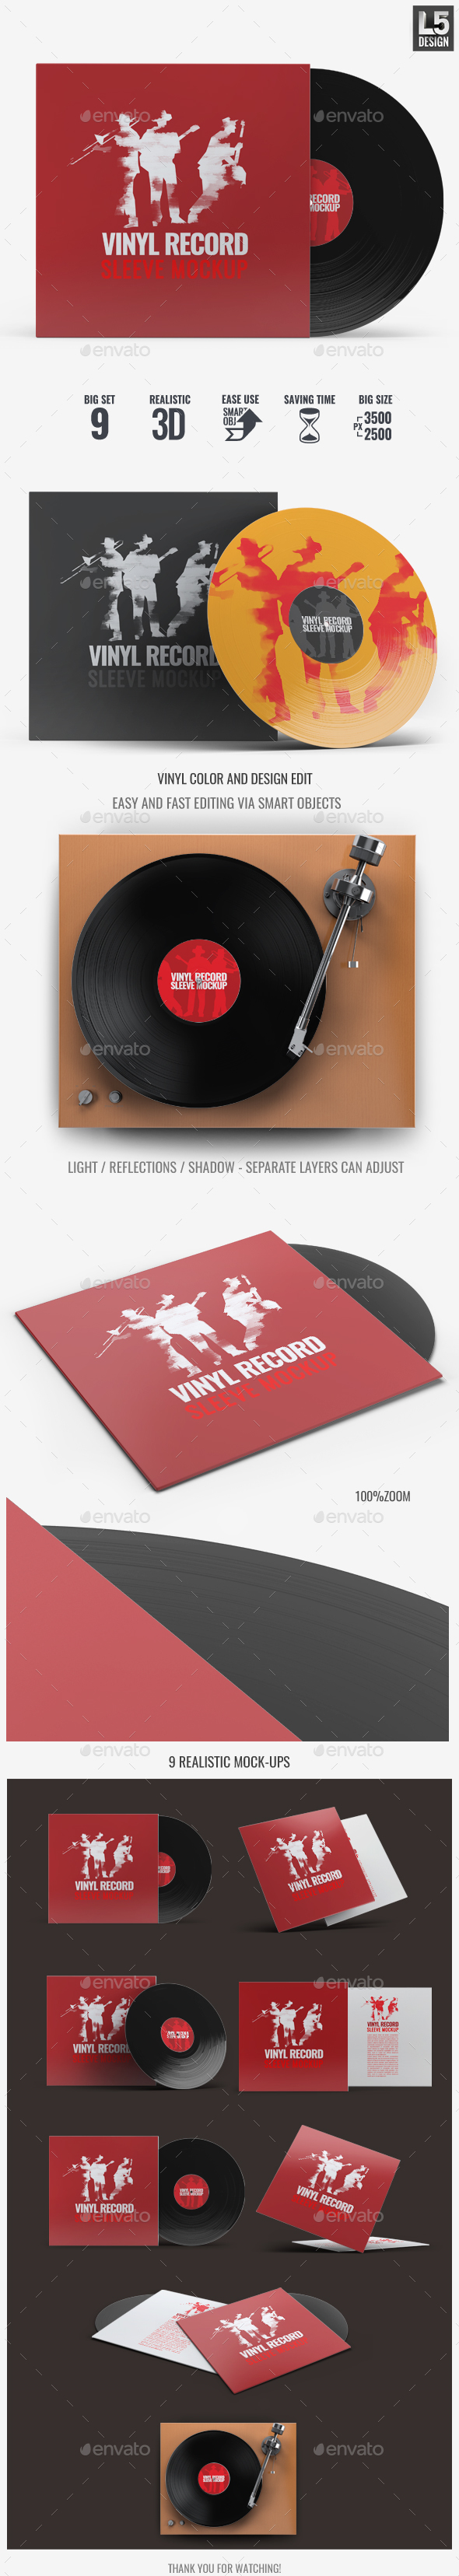 Download Vinyl Record Sleeve Mock-Up by L5Design | GraphicRiver